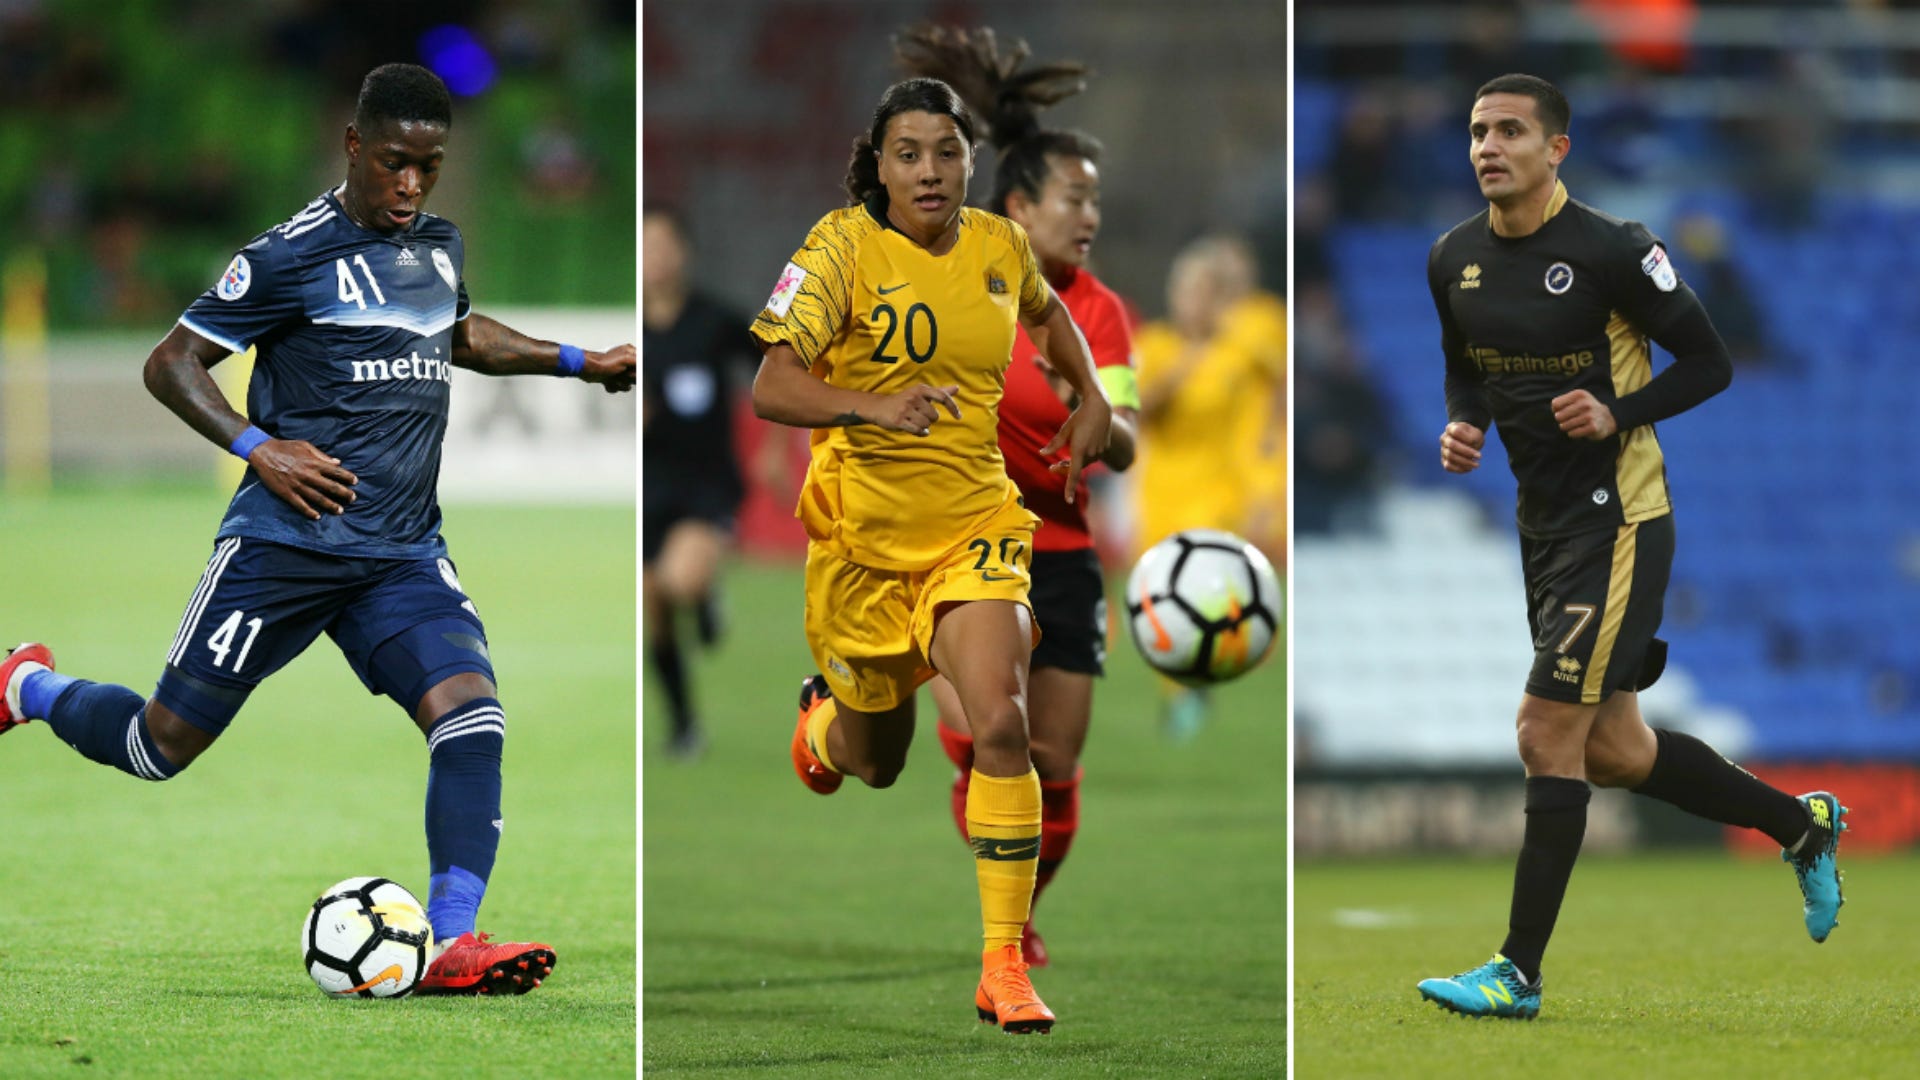 Live football on TV Australia match schedule this week, online streams and free-to-air Goal